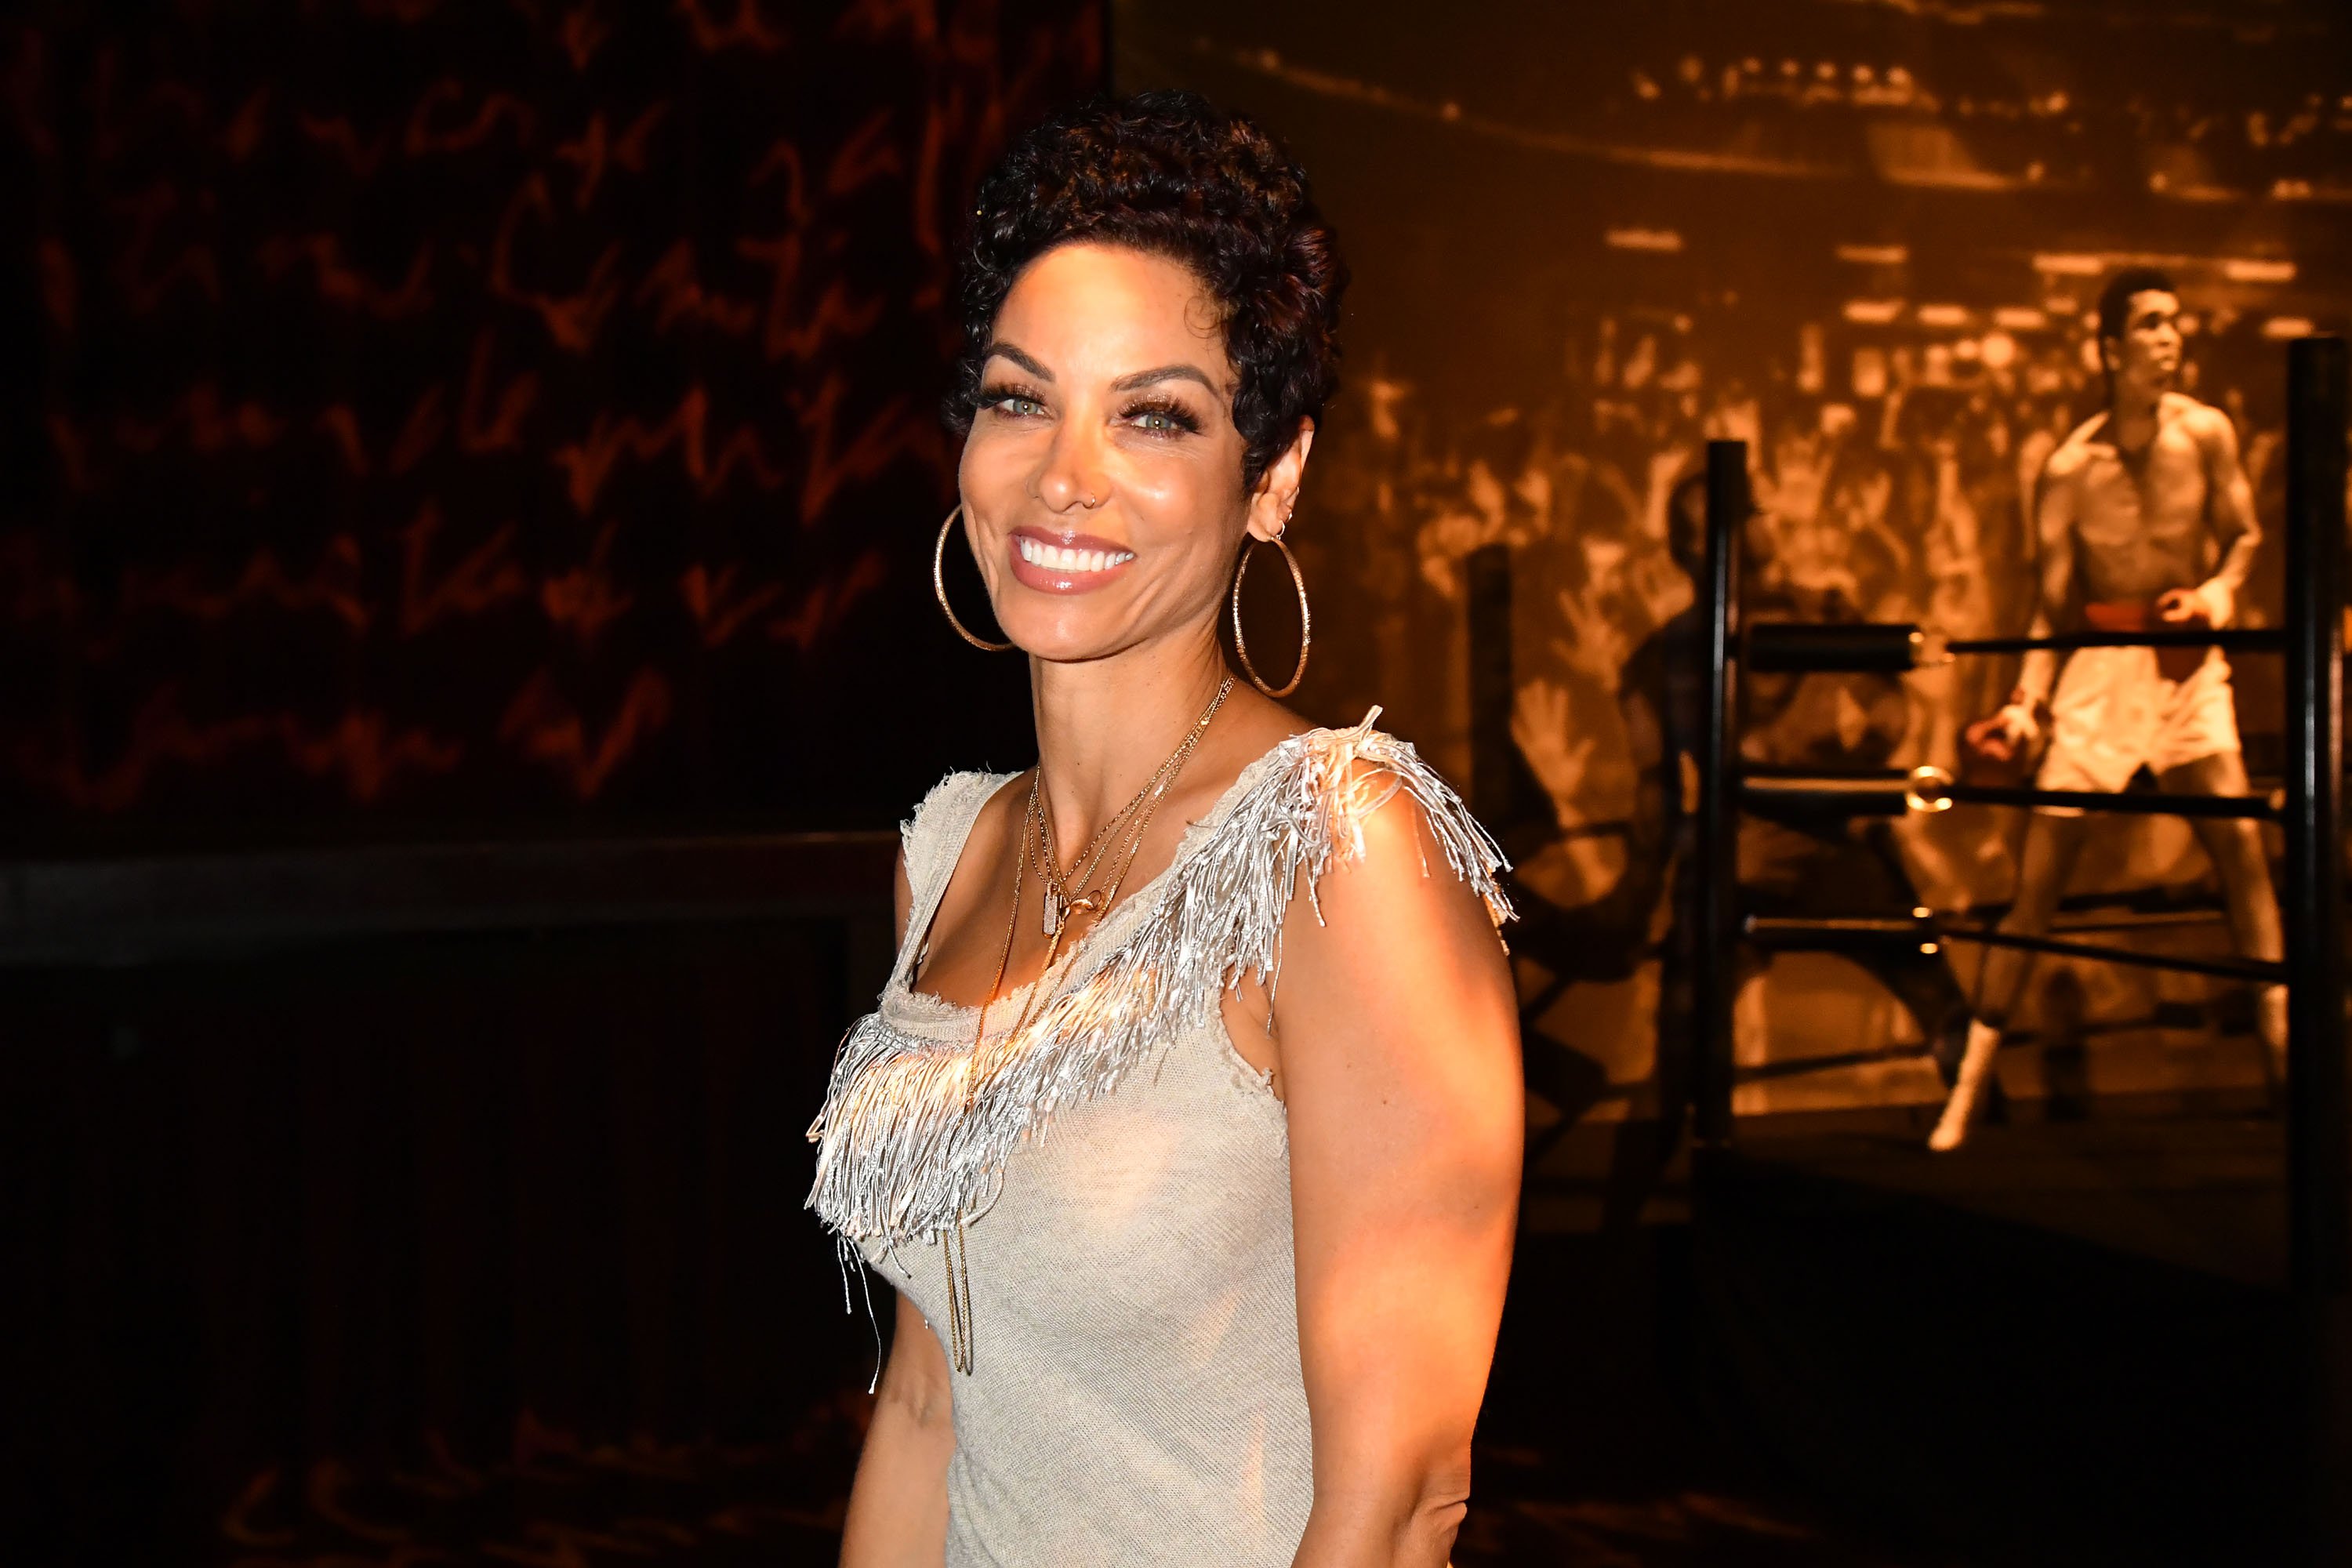 Nicole Murphy at the after party for "What's My Name | Muhammad Ali" from HBO on May 08, 2019 in Los Angeles, California. |Source: Getty Images